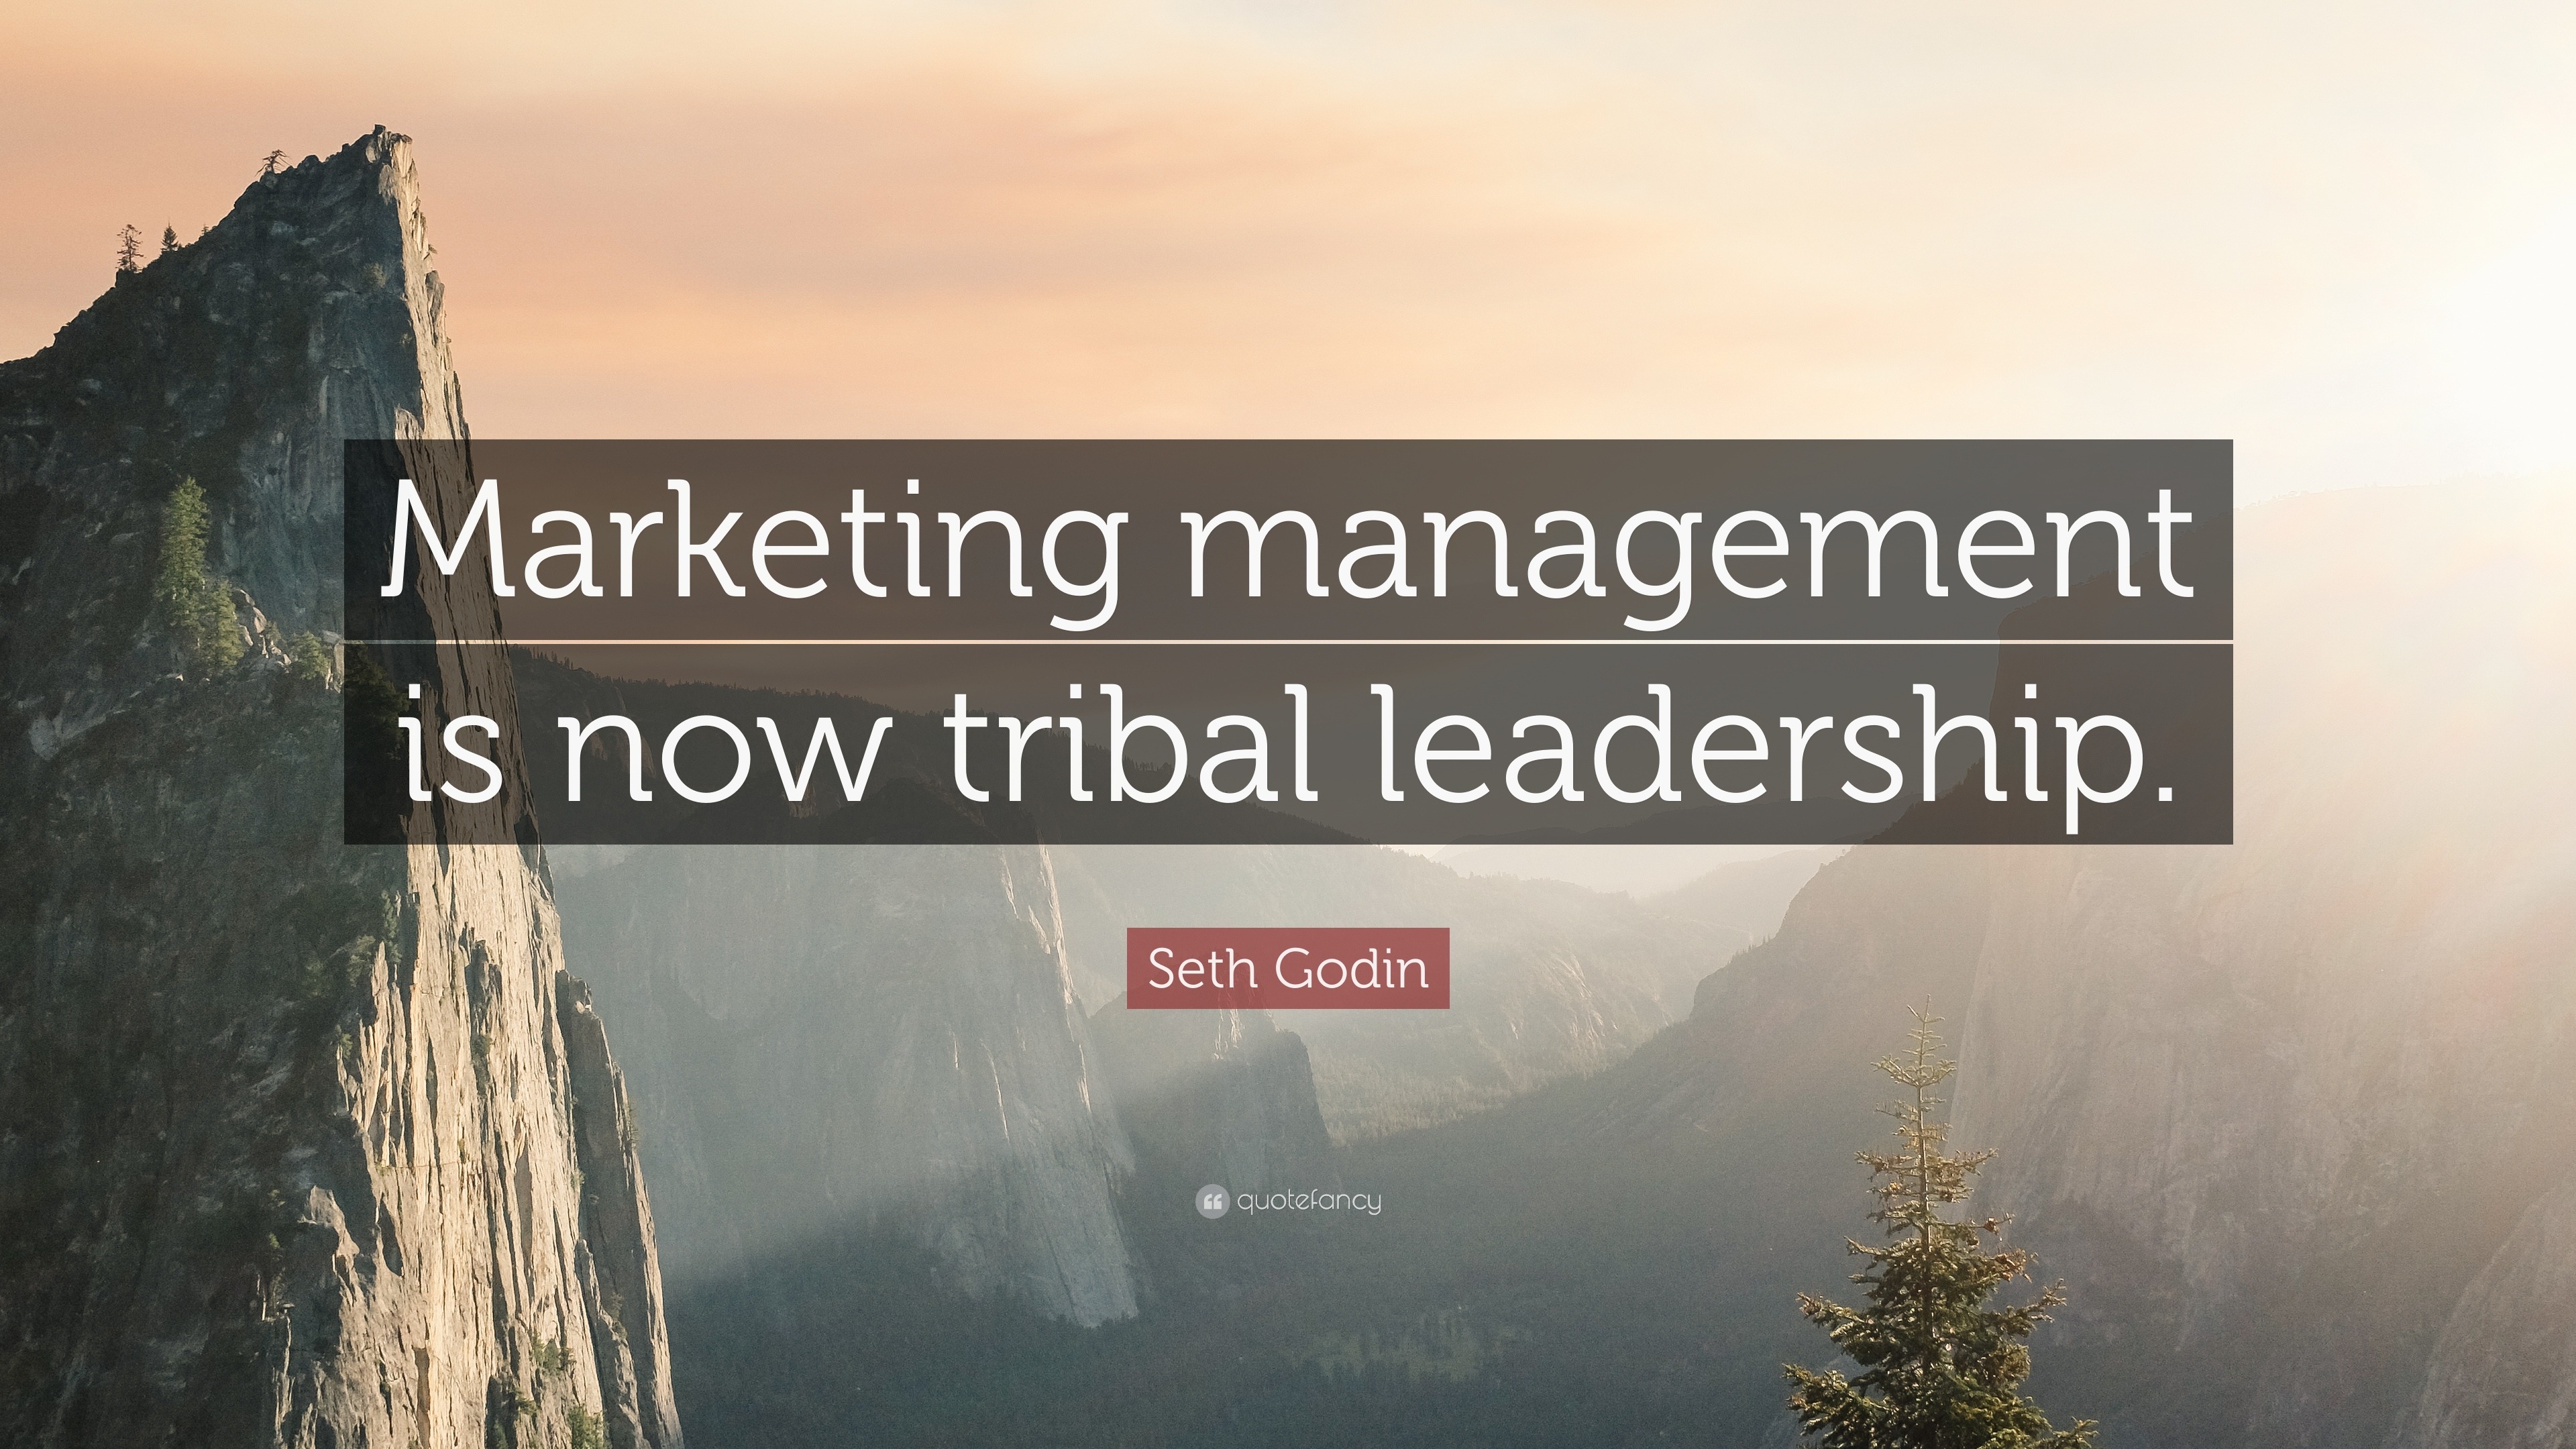 Seth Godin Quote “Marketing management is now tribal